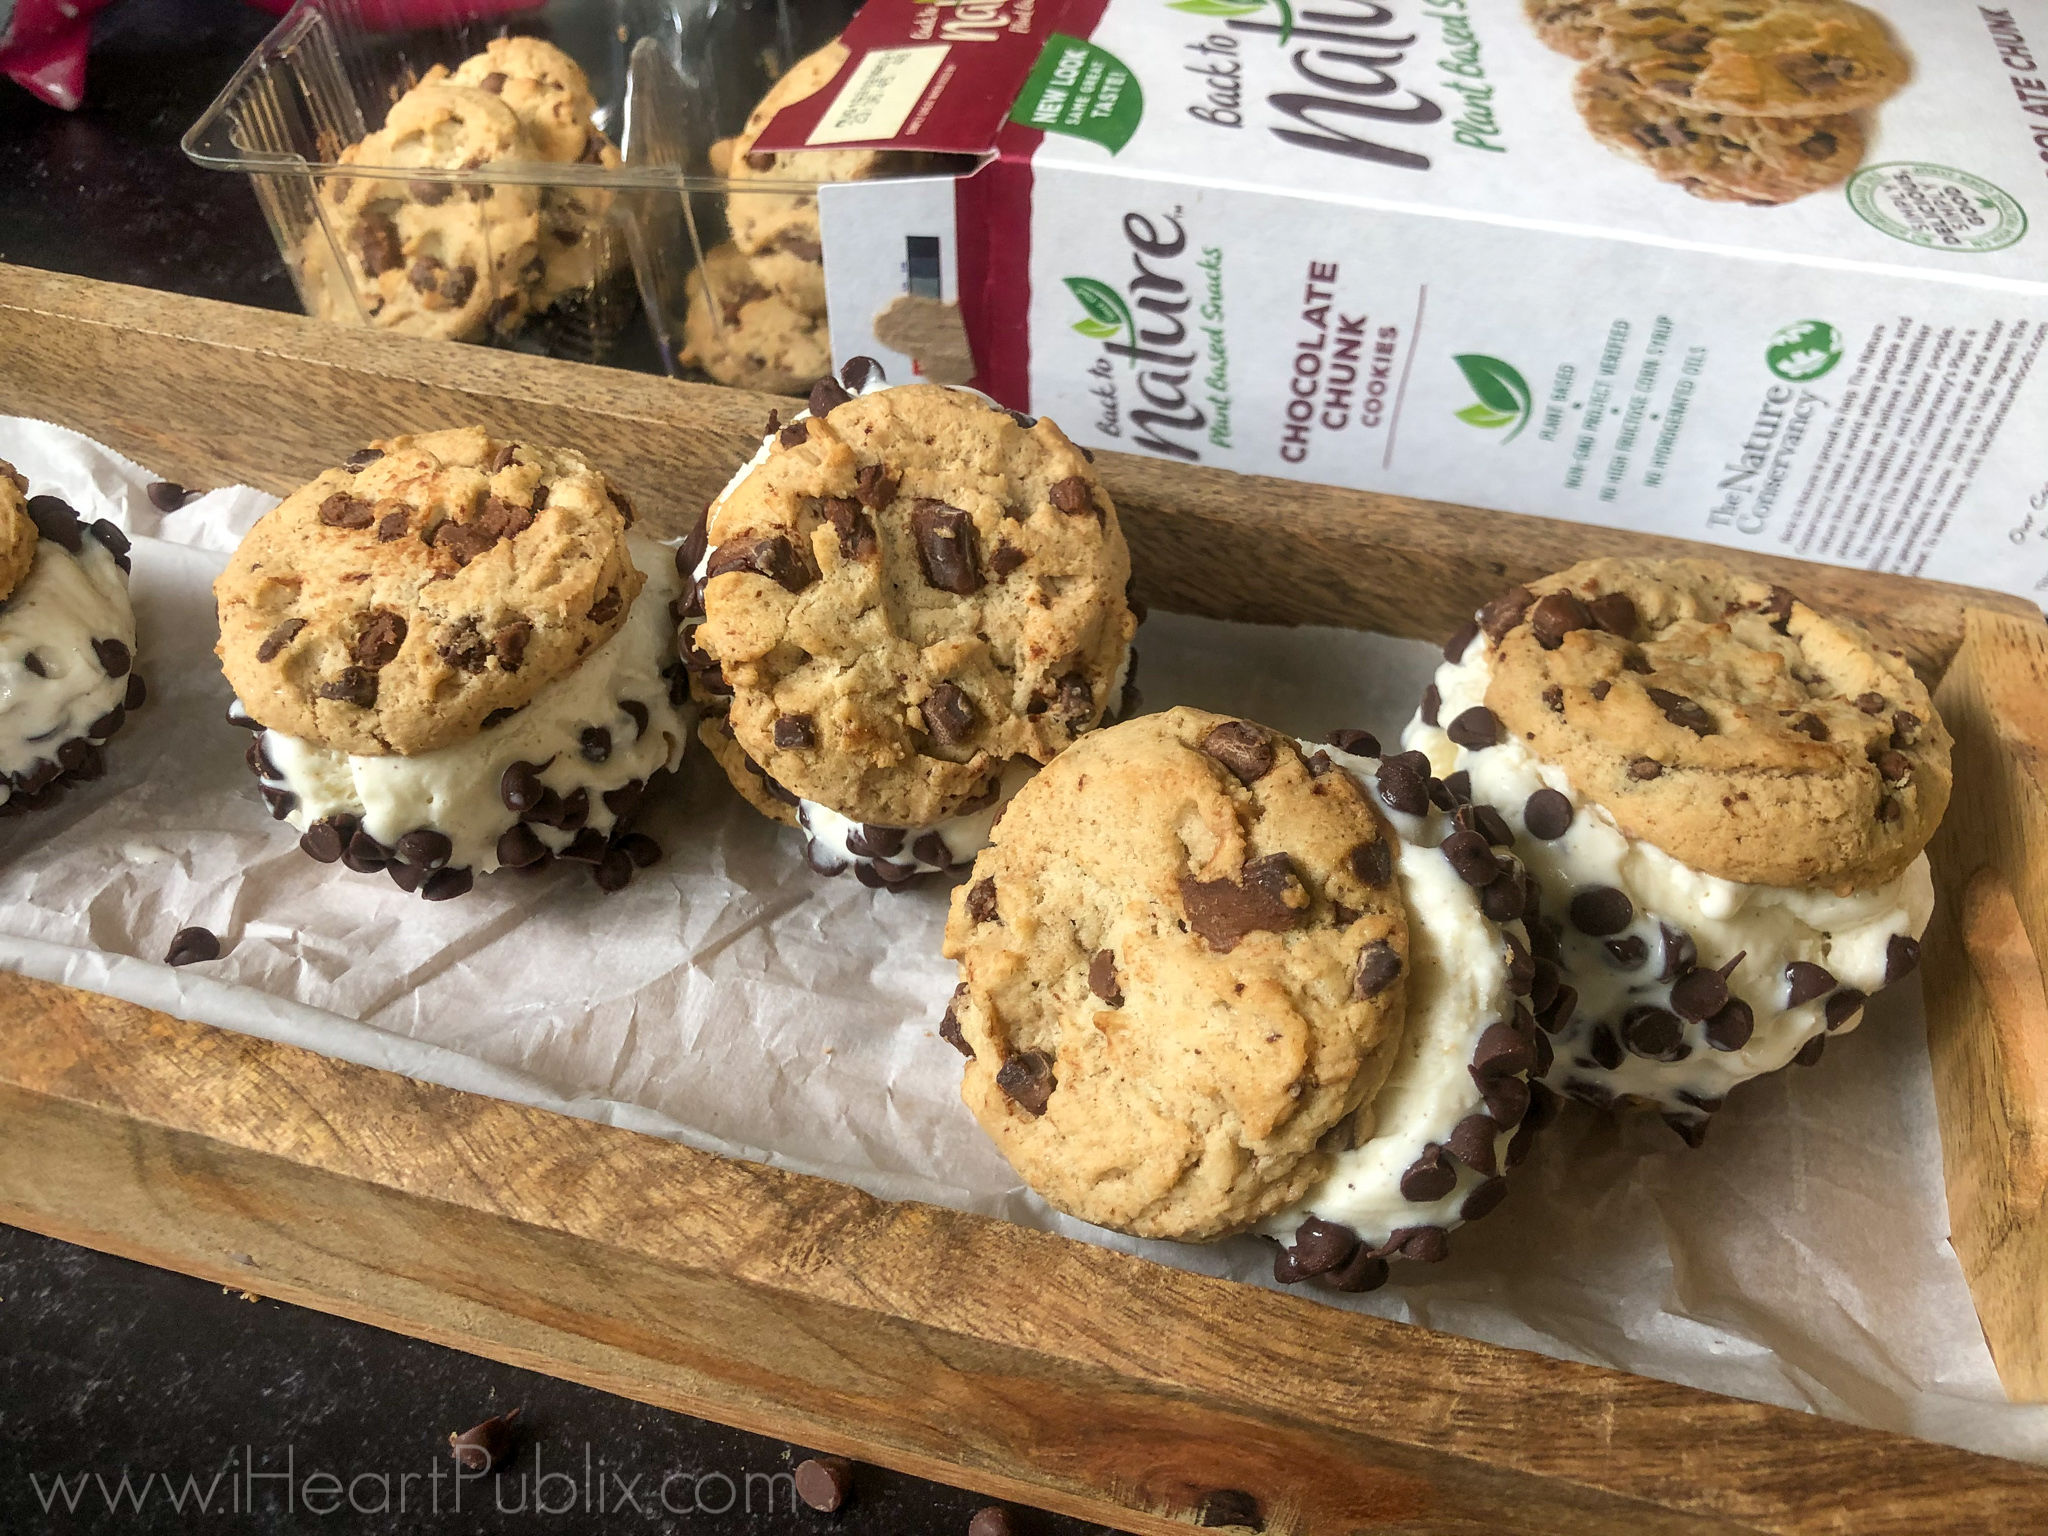 Big Savings On Back To Nature™ Plant-Based Cookies & Crackers At Publix! on I Heart Publix